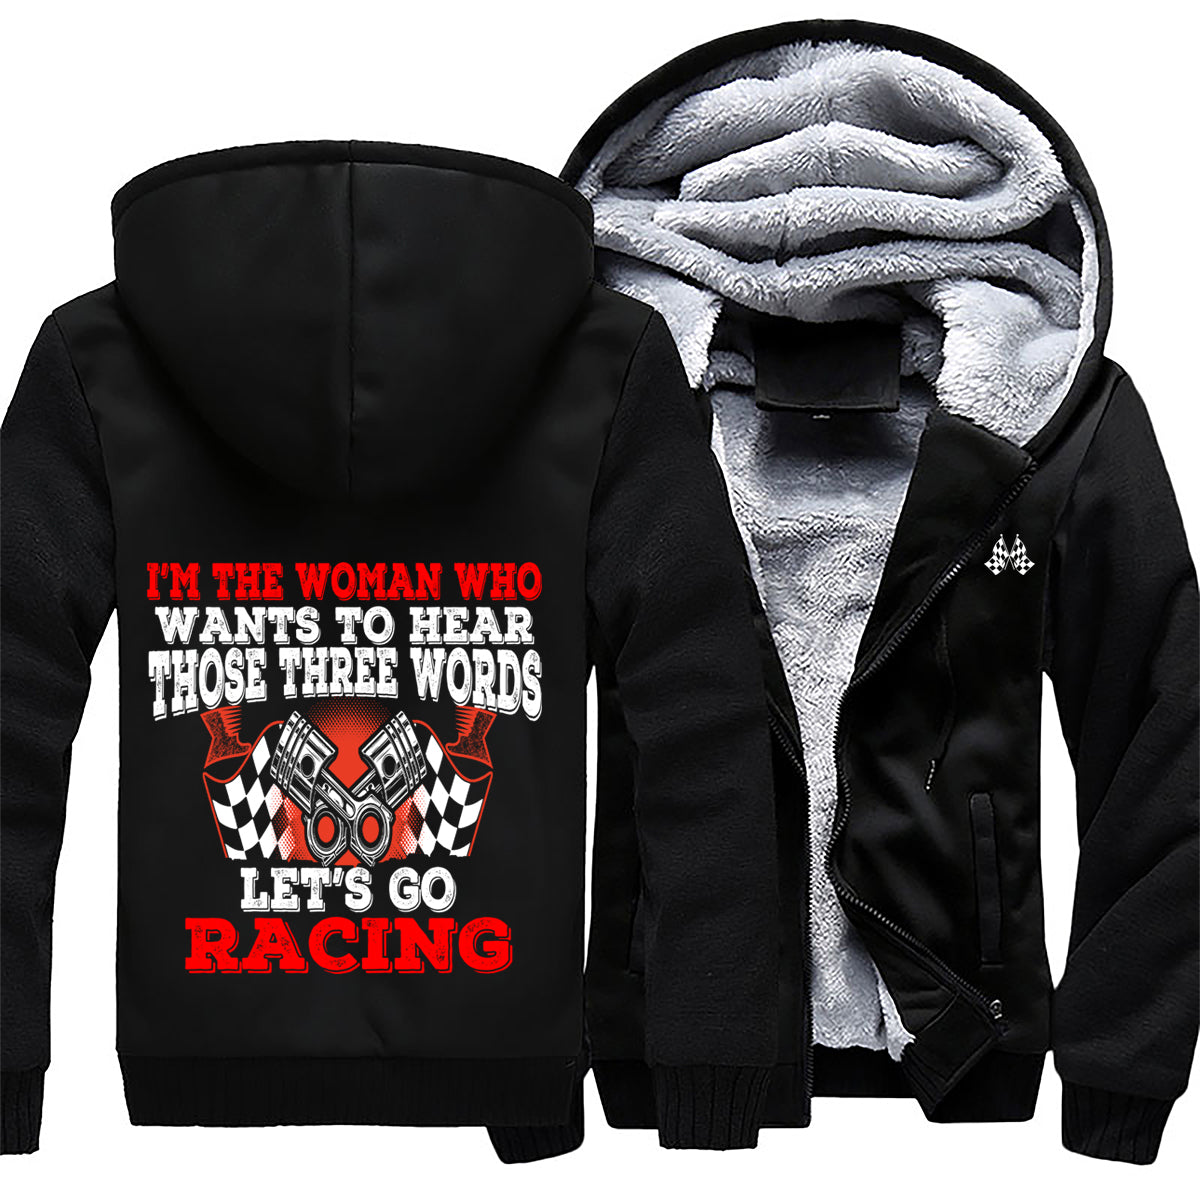 I'm The Woman Who Wants To hear Those 3 Words Racing Jacket 